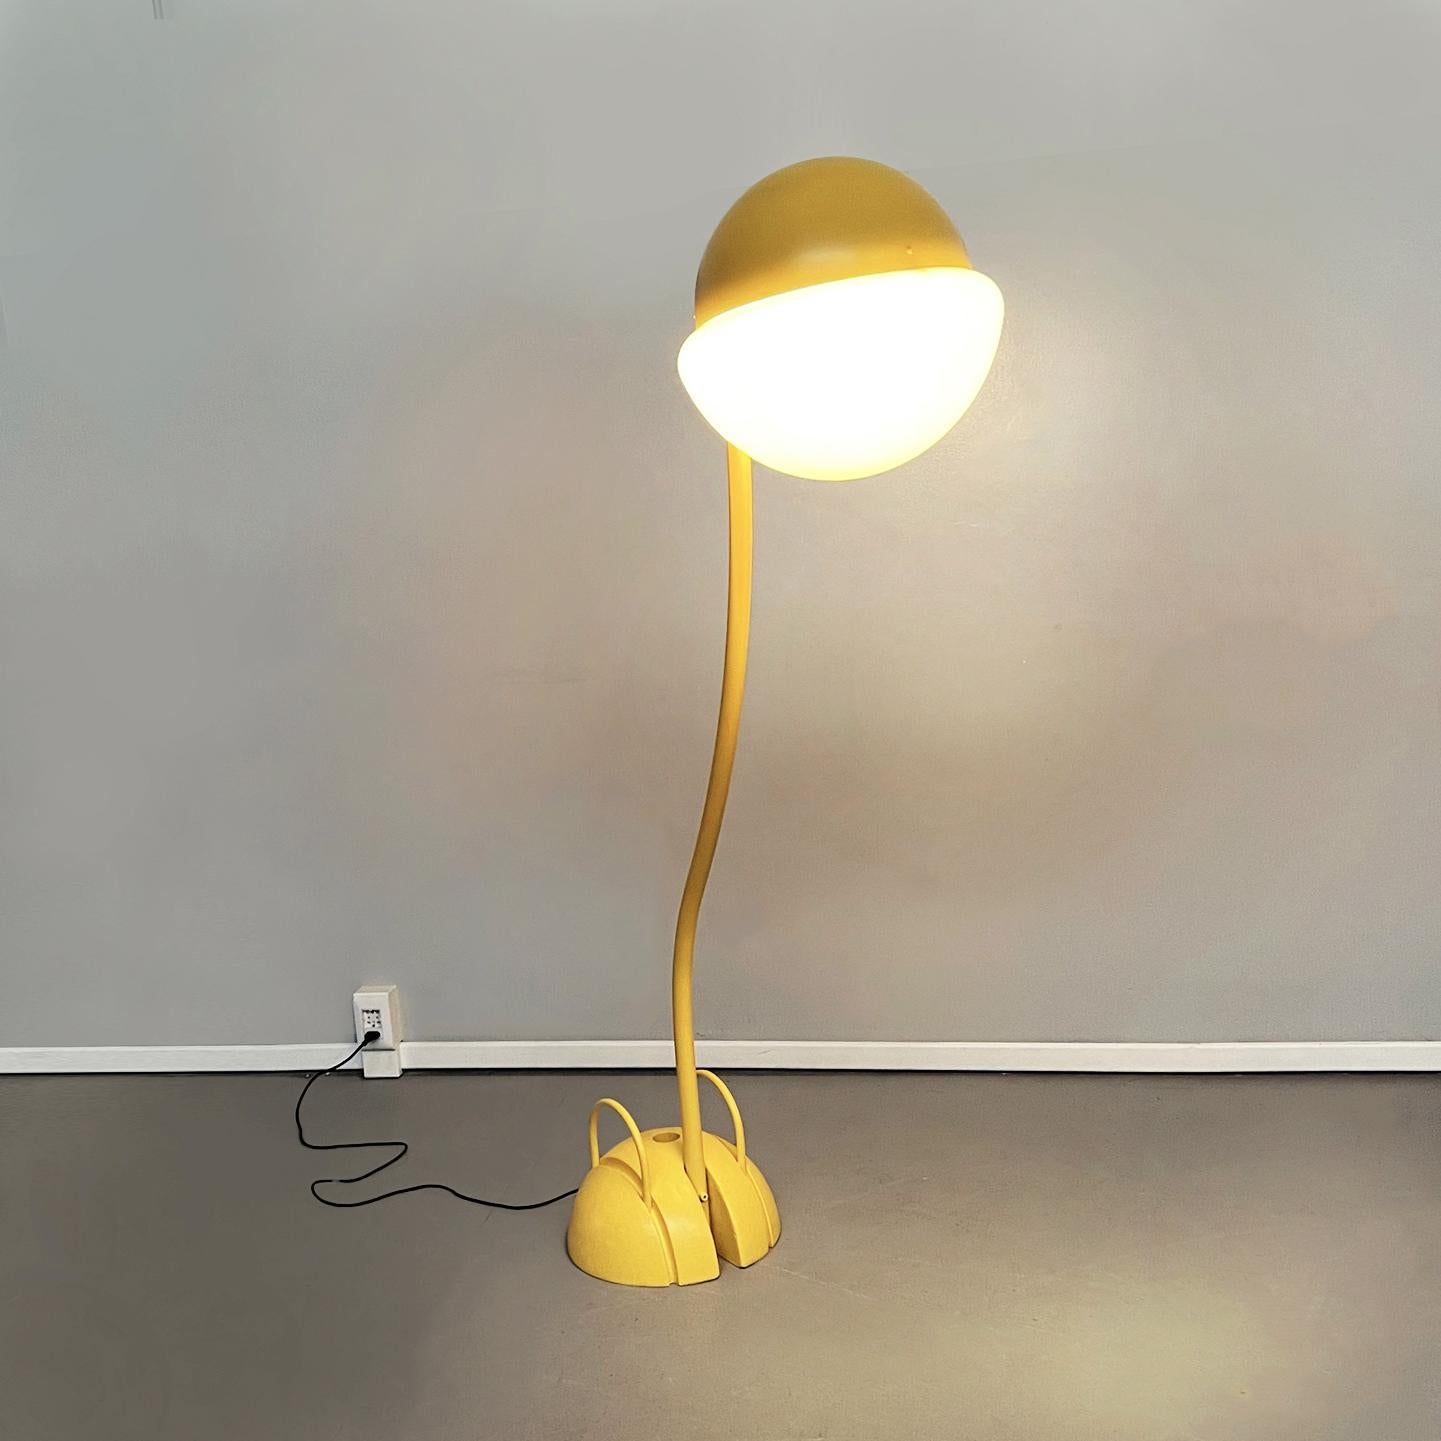 Italian mid-century Yellow floor lamp Locus Solus by Gae Aulenti for Poltronova, 1960s
Floor lamp from the Locus Solus series. The spherical lampshade is half in metal and half in opal polyurethane. The lamp is adjustable thanks to the screw,